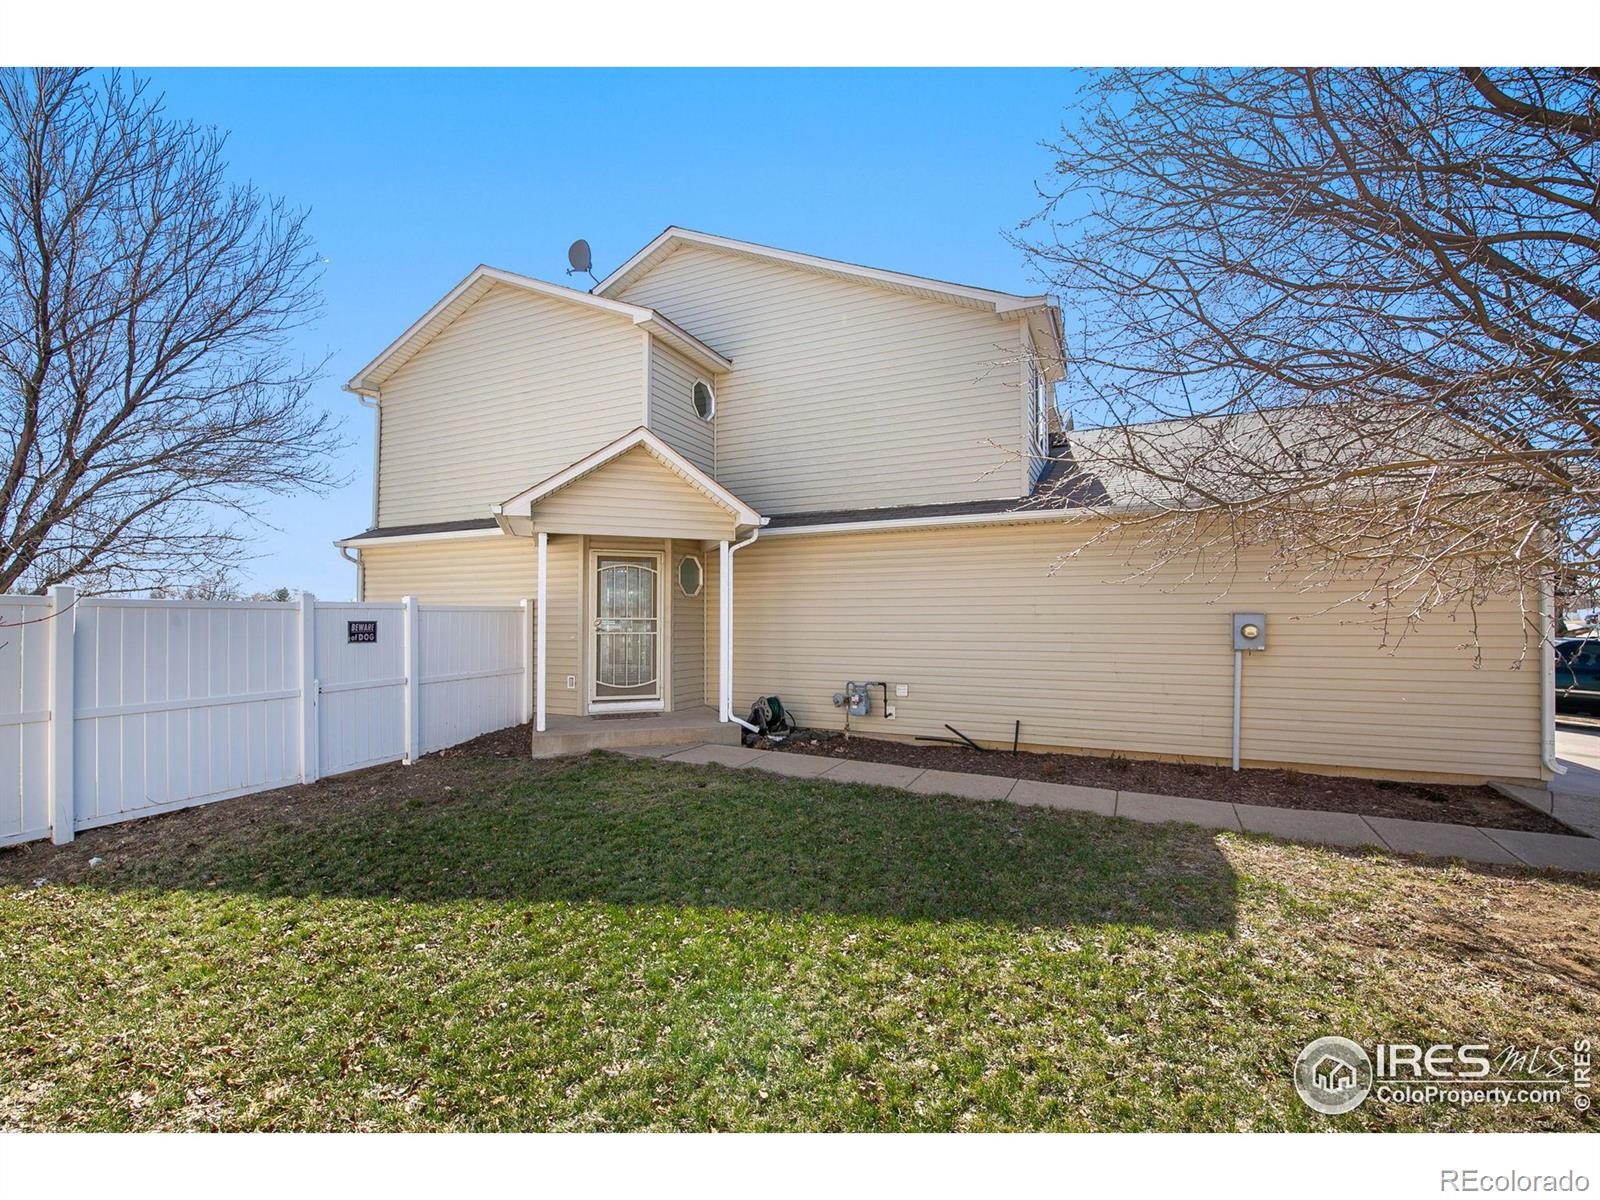 Report Image for 514 N 28th Ave Ct,Greeley, Colorado